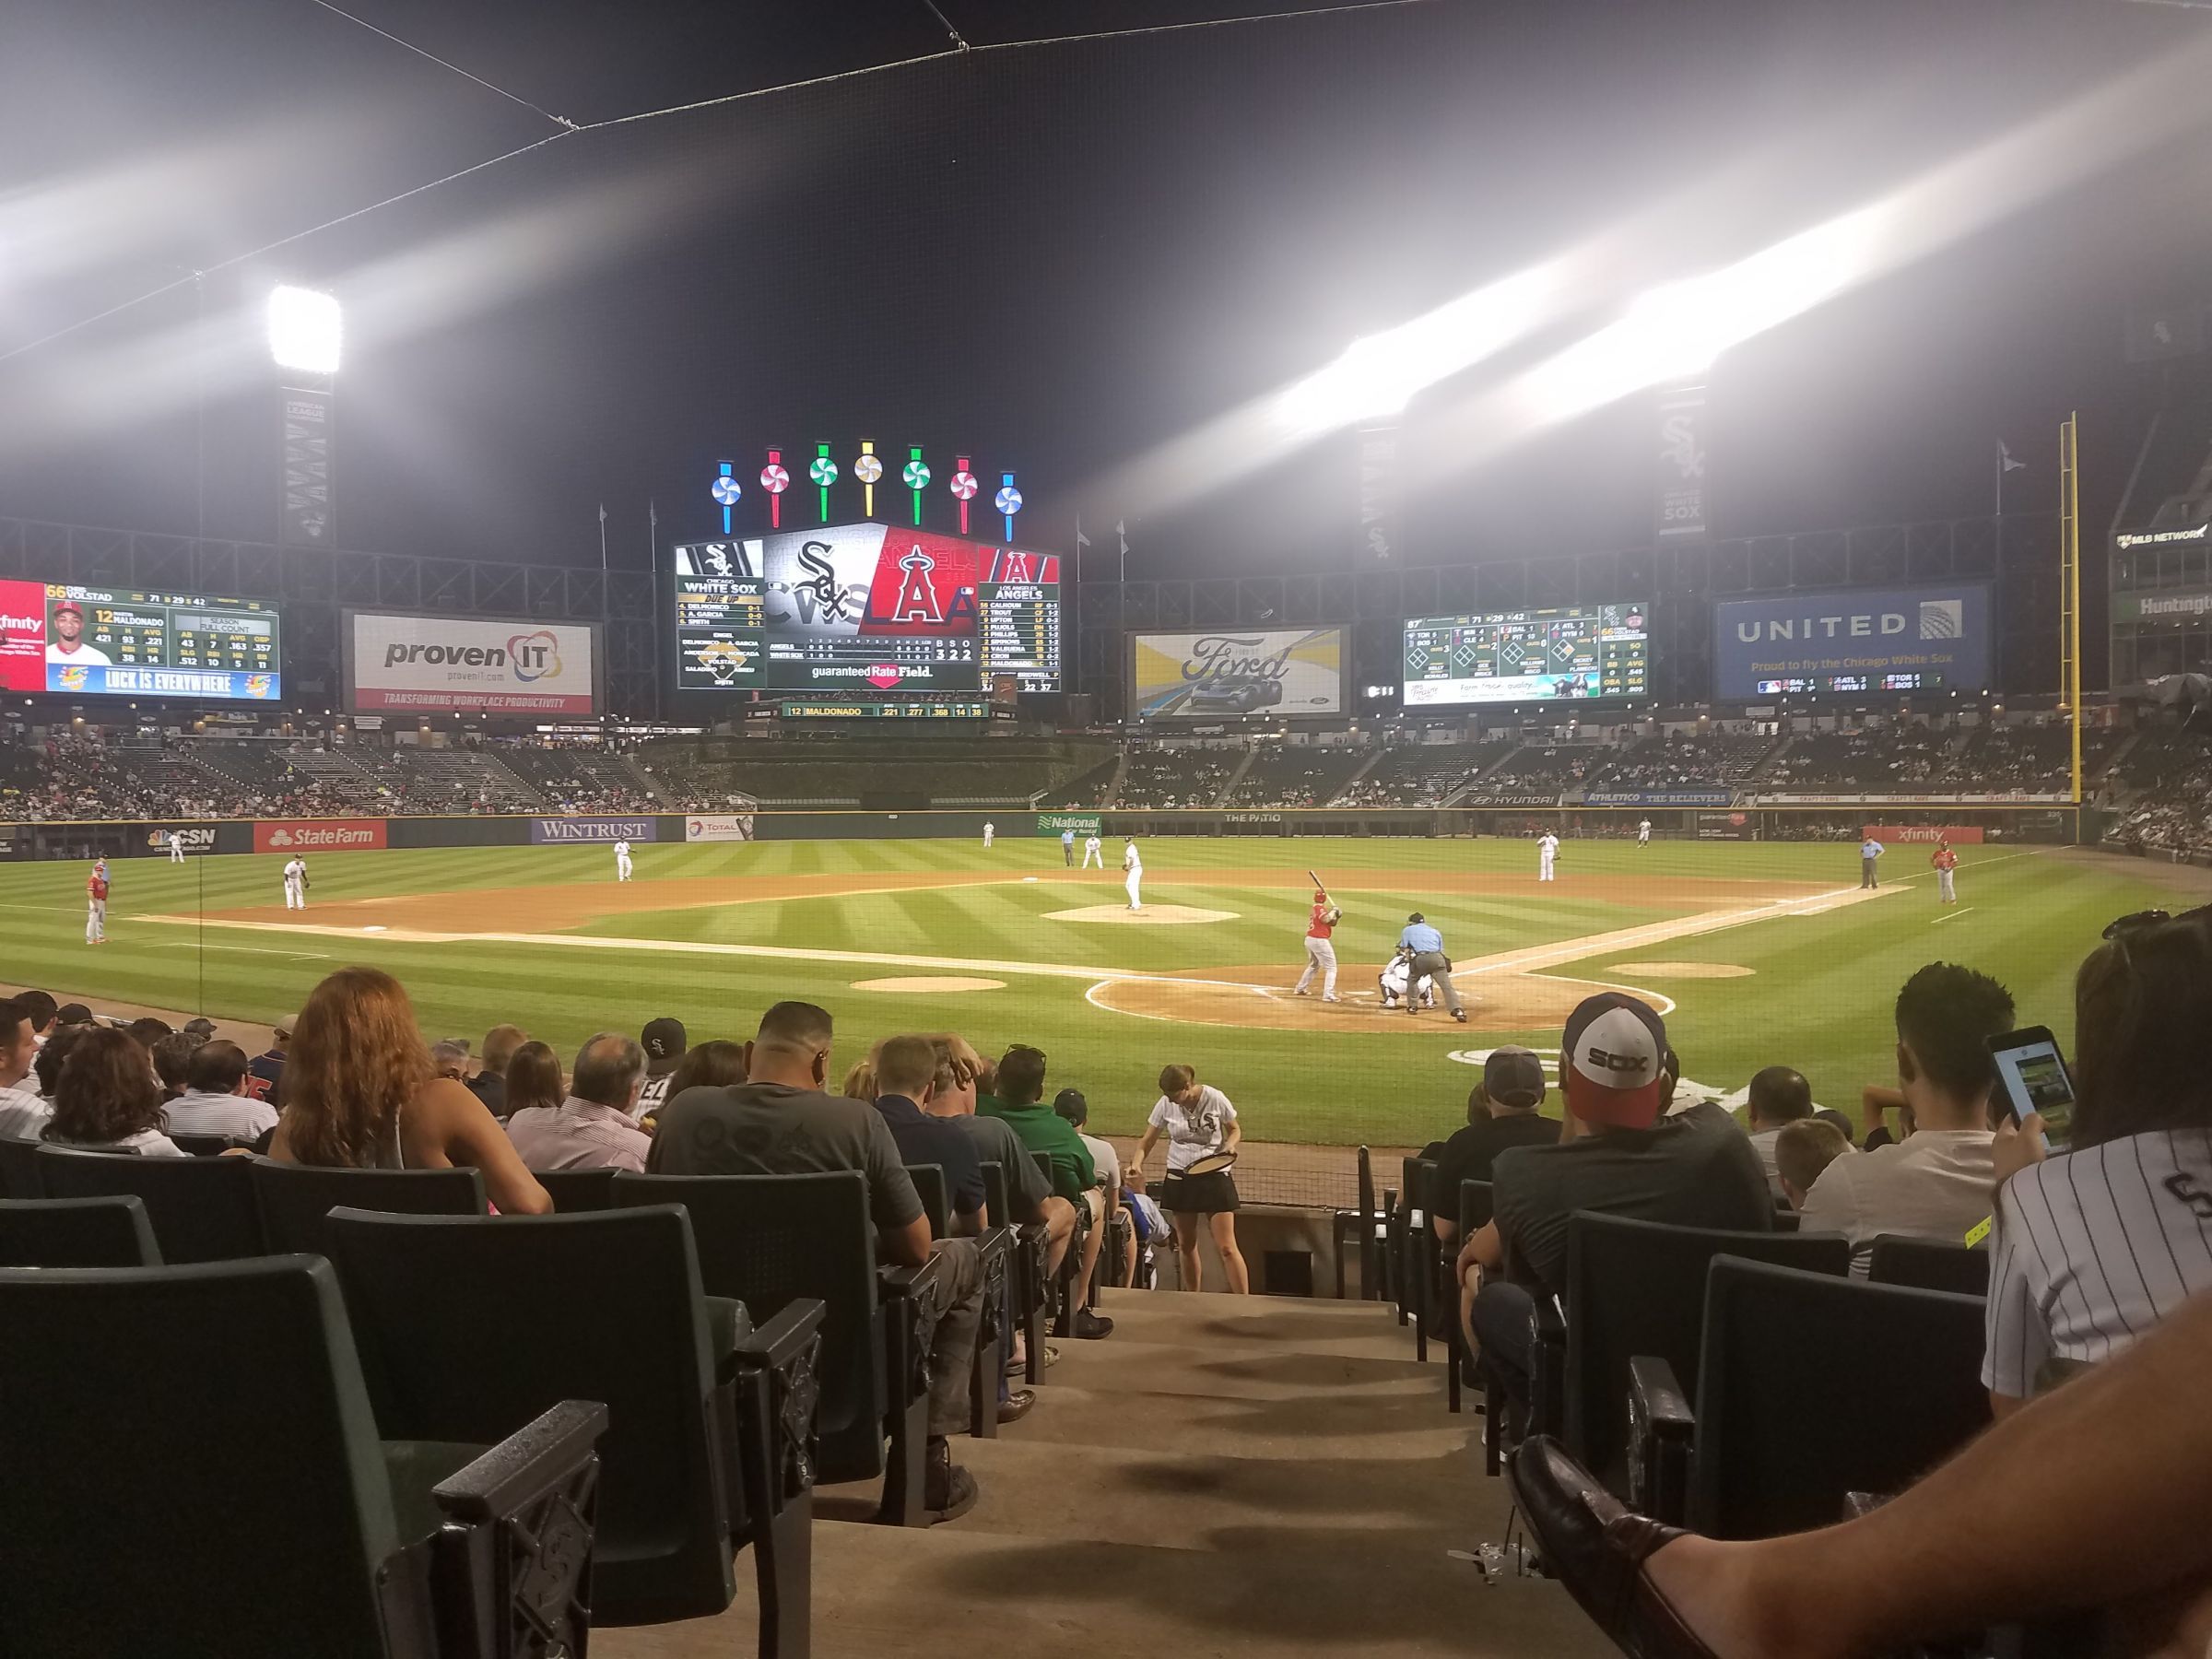 scout seats 134, row 11 seat view  - guaranteed rate field